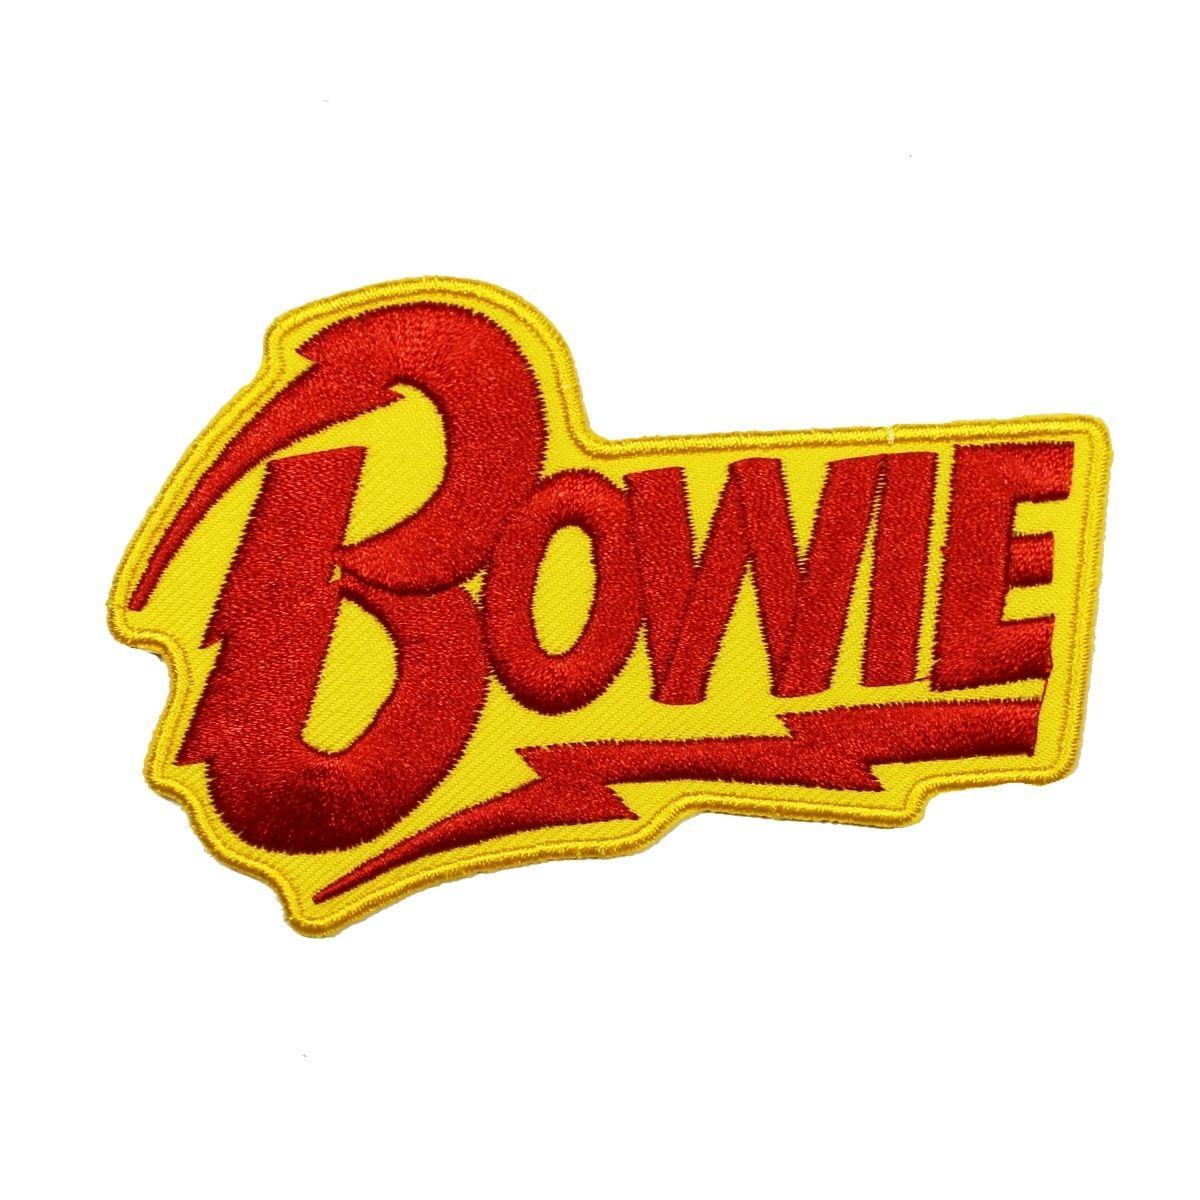 Glam Rock Band Logo - David Bowie Name Patch Music Artist Actor Glam Rock Band Iron On Applique